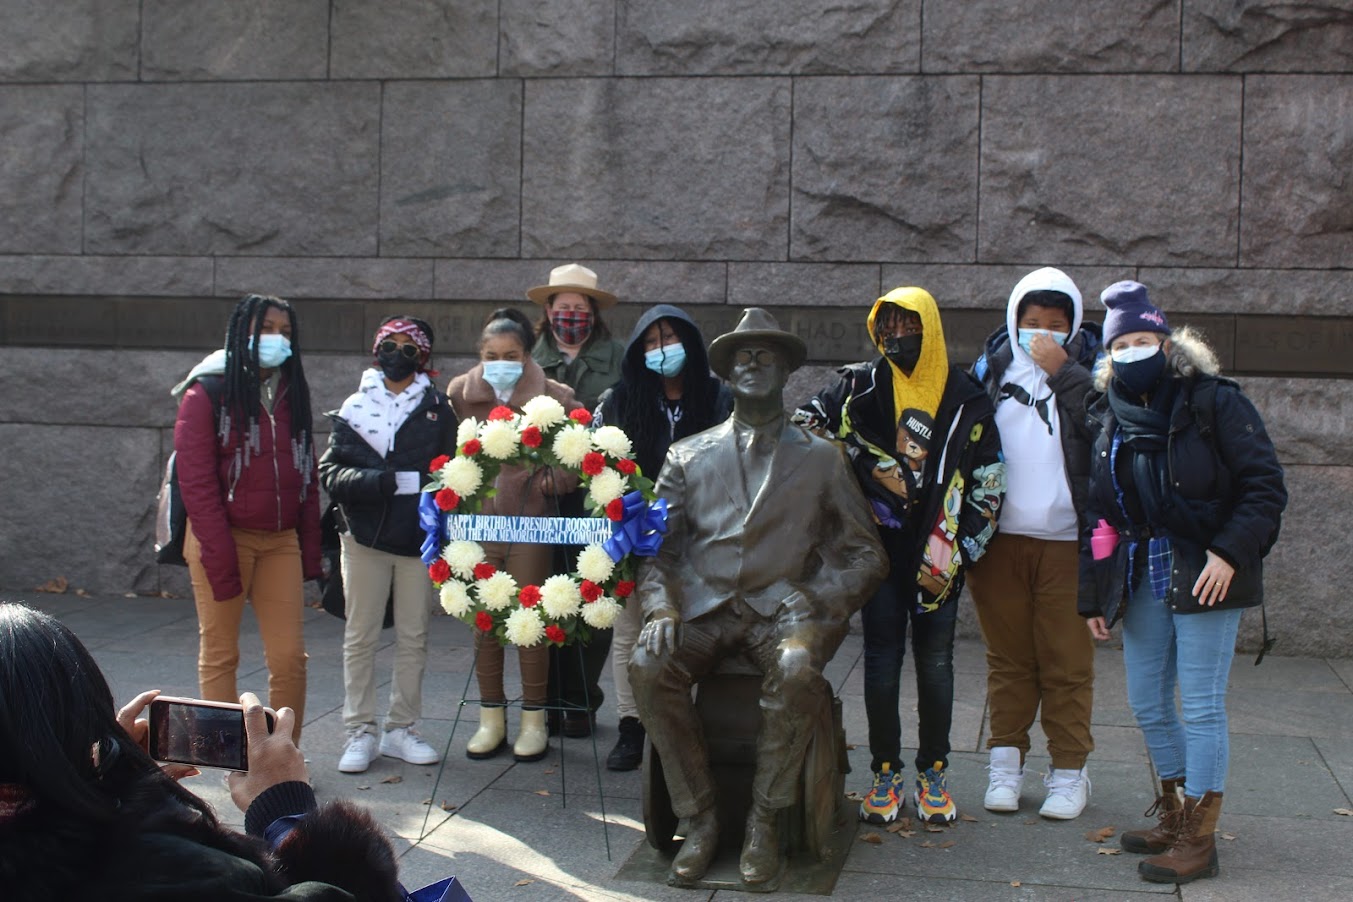 Students from Browne Education Campus surround FDR Wheelchair statue to take picture with Mary Dolan, executive director of FDR Committee, and the beautiful red, white, and blue wreath to the left of statue.